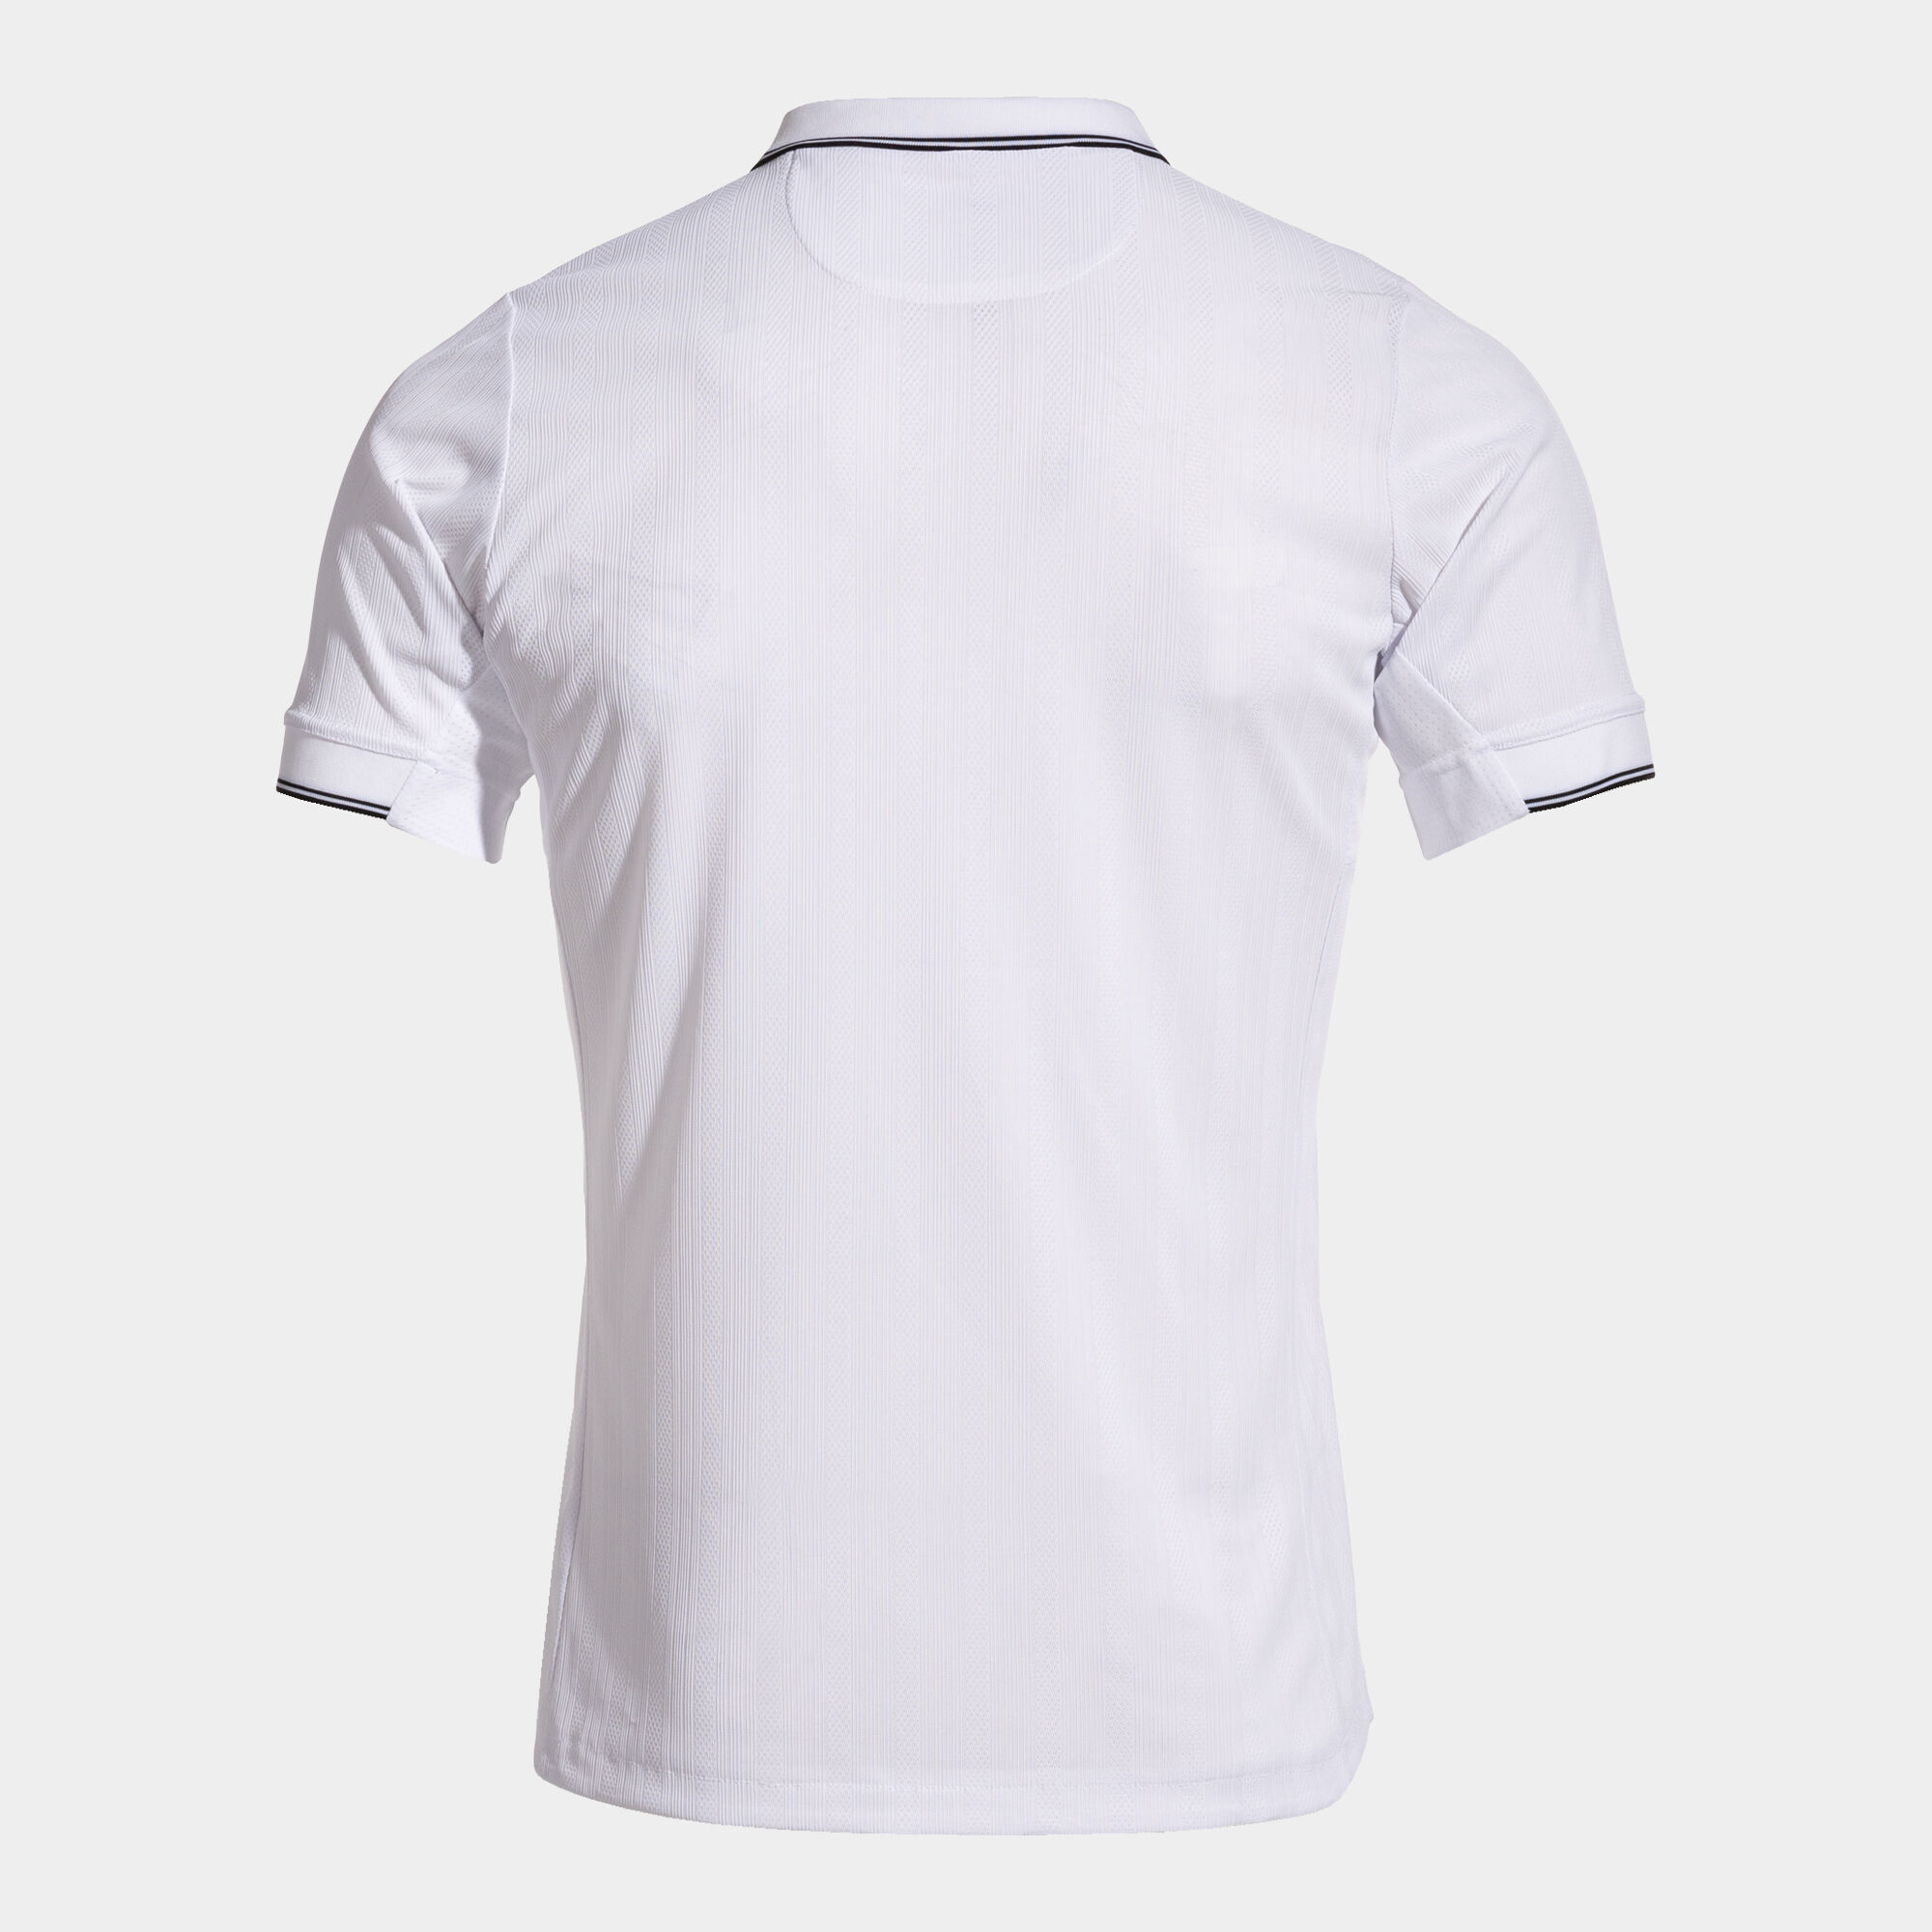 Maillot manches courtes homme Fit one blanc